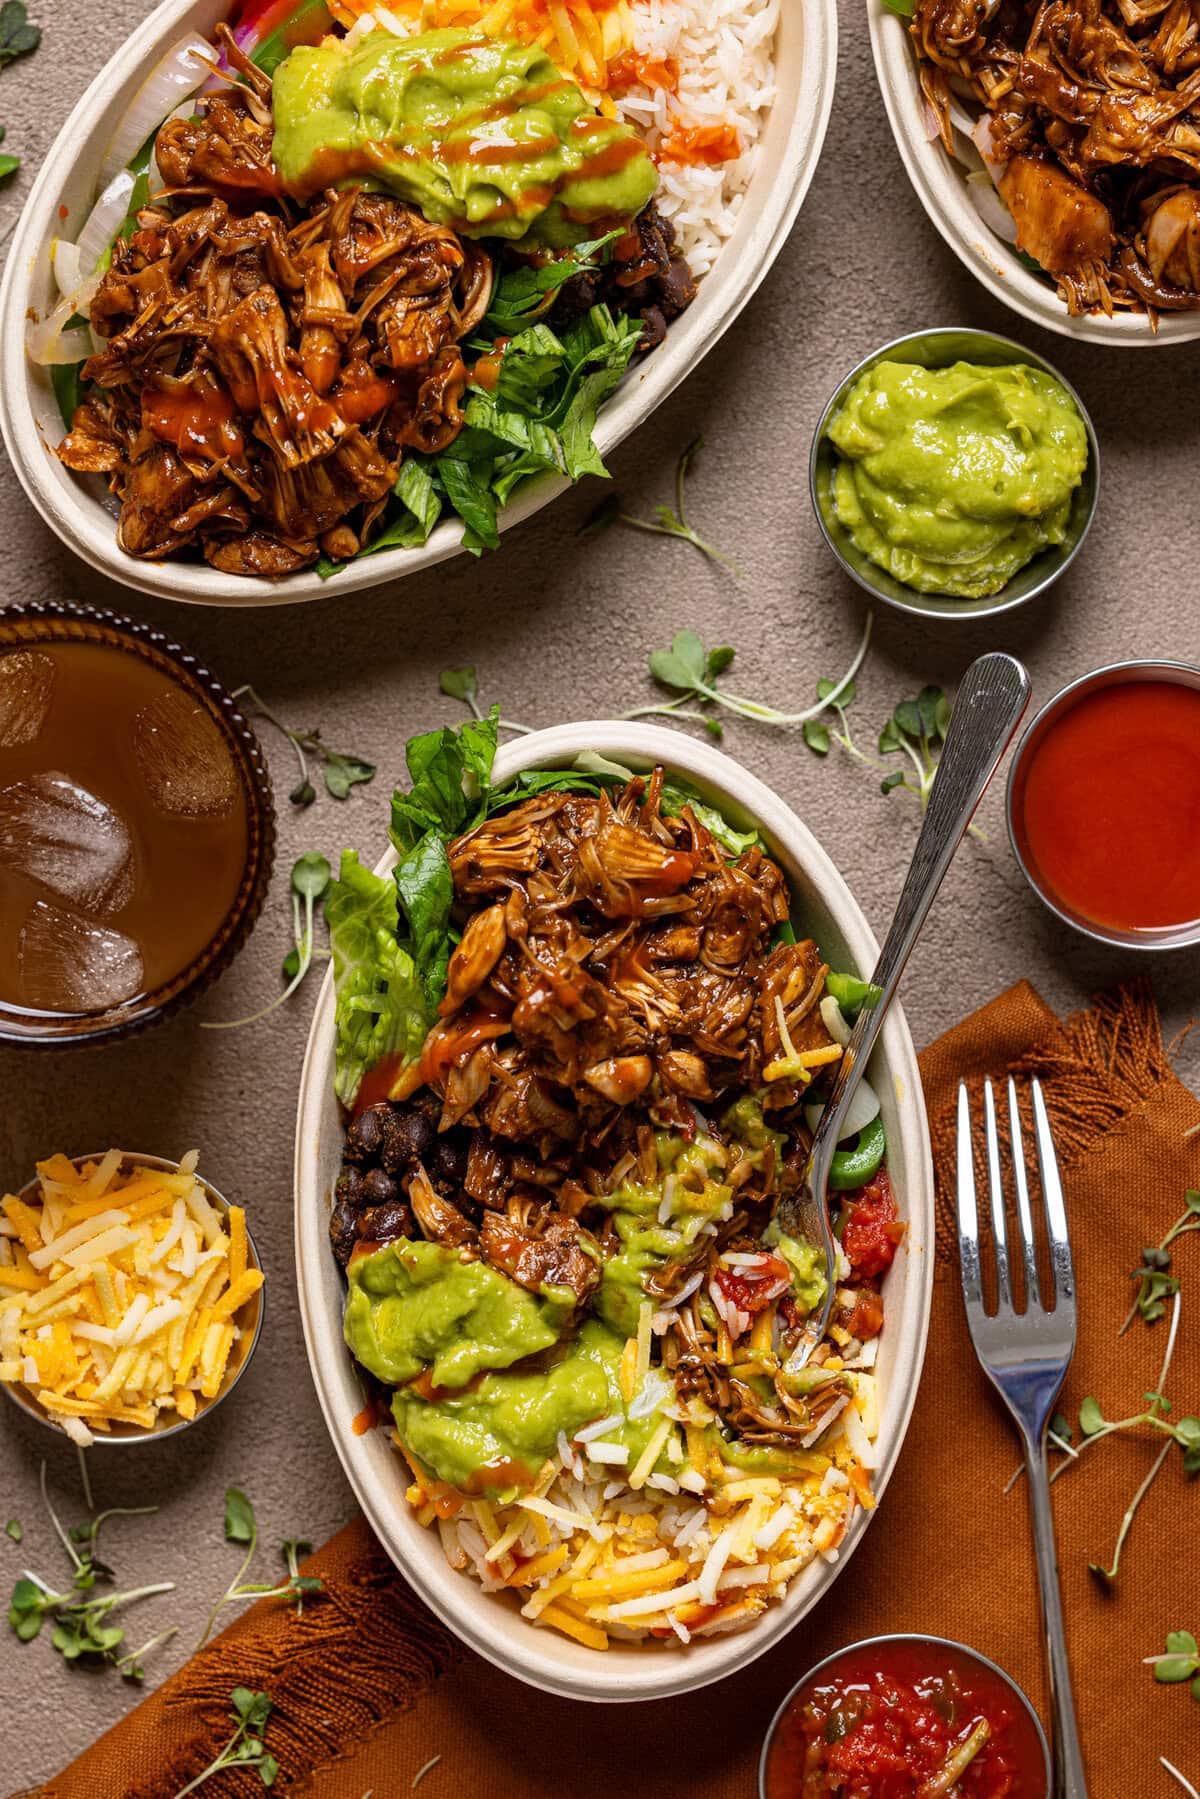 Overview shot of two burrito bowls with drinks and condiments.